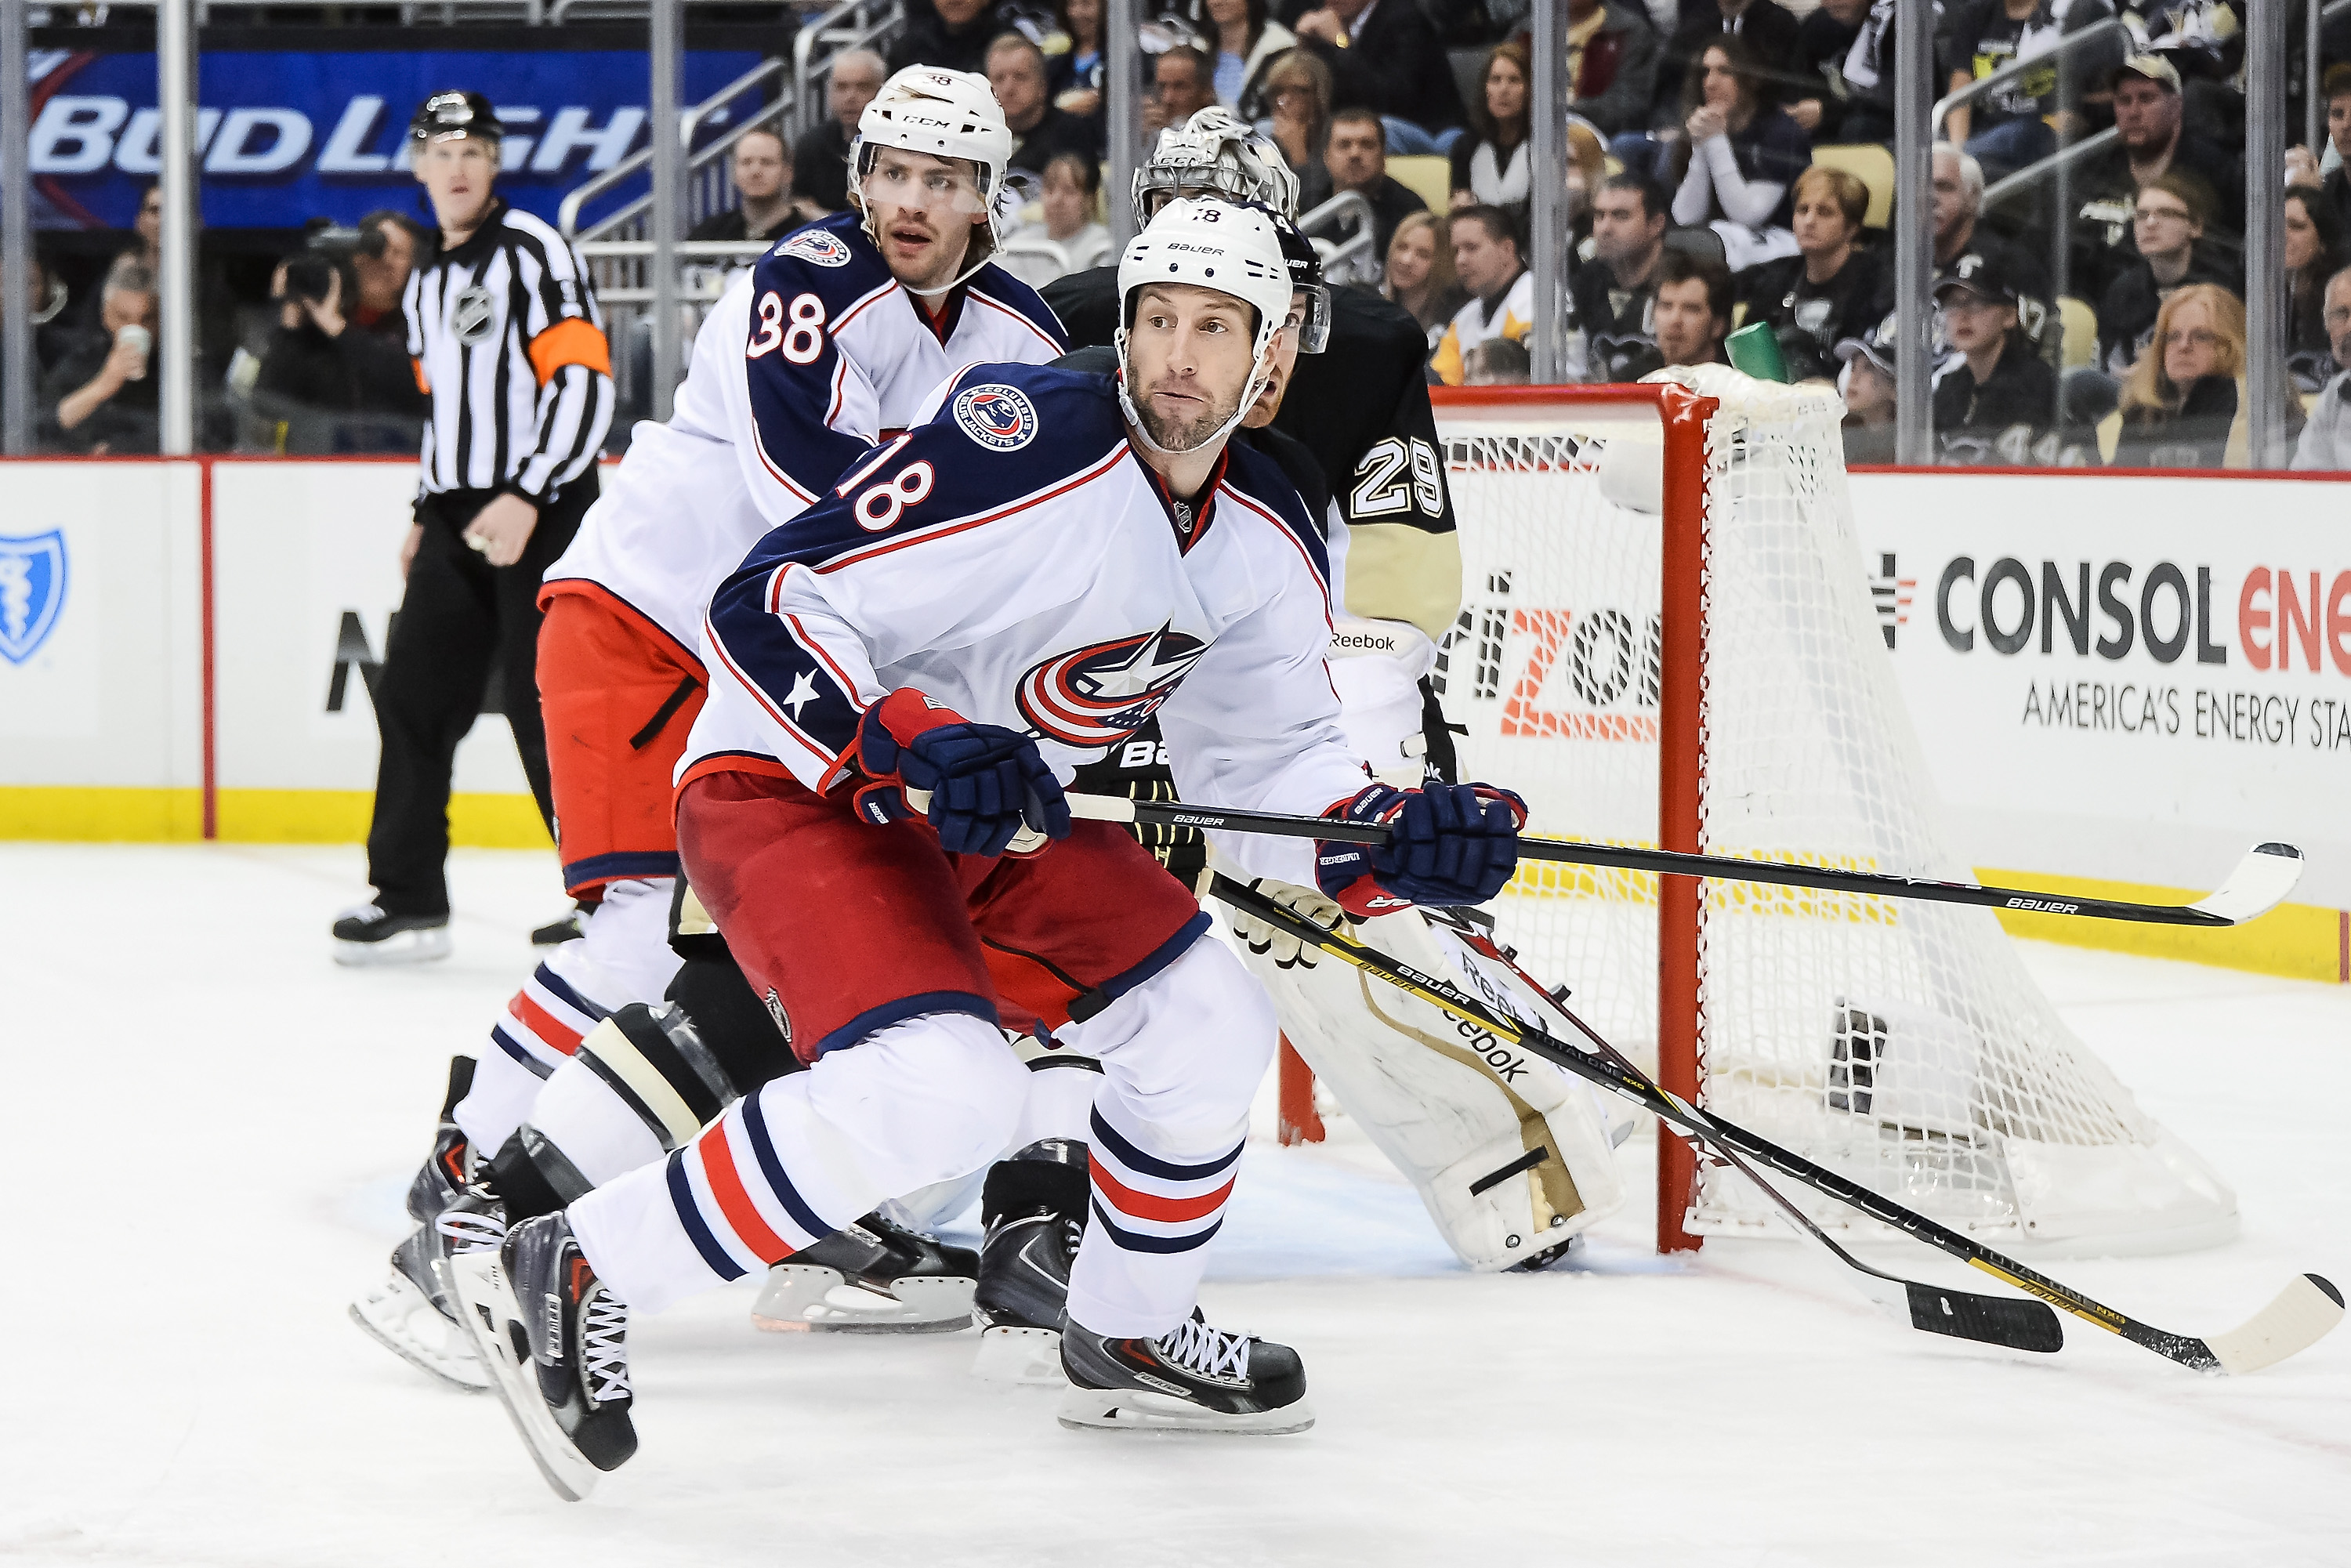 Columbus Blue Jackets  v Pittsburgh Penguins - Game Two